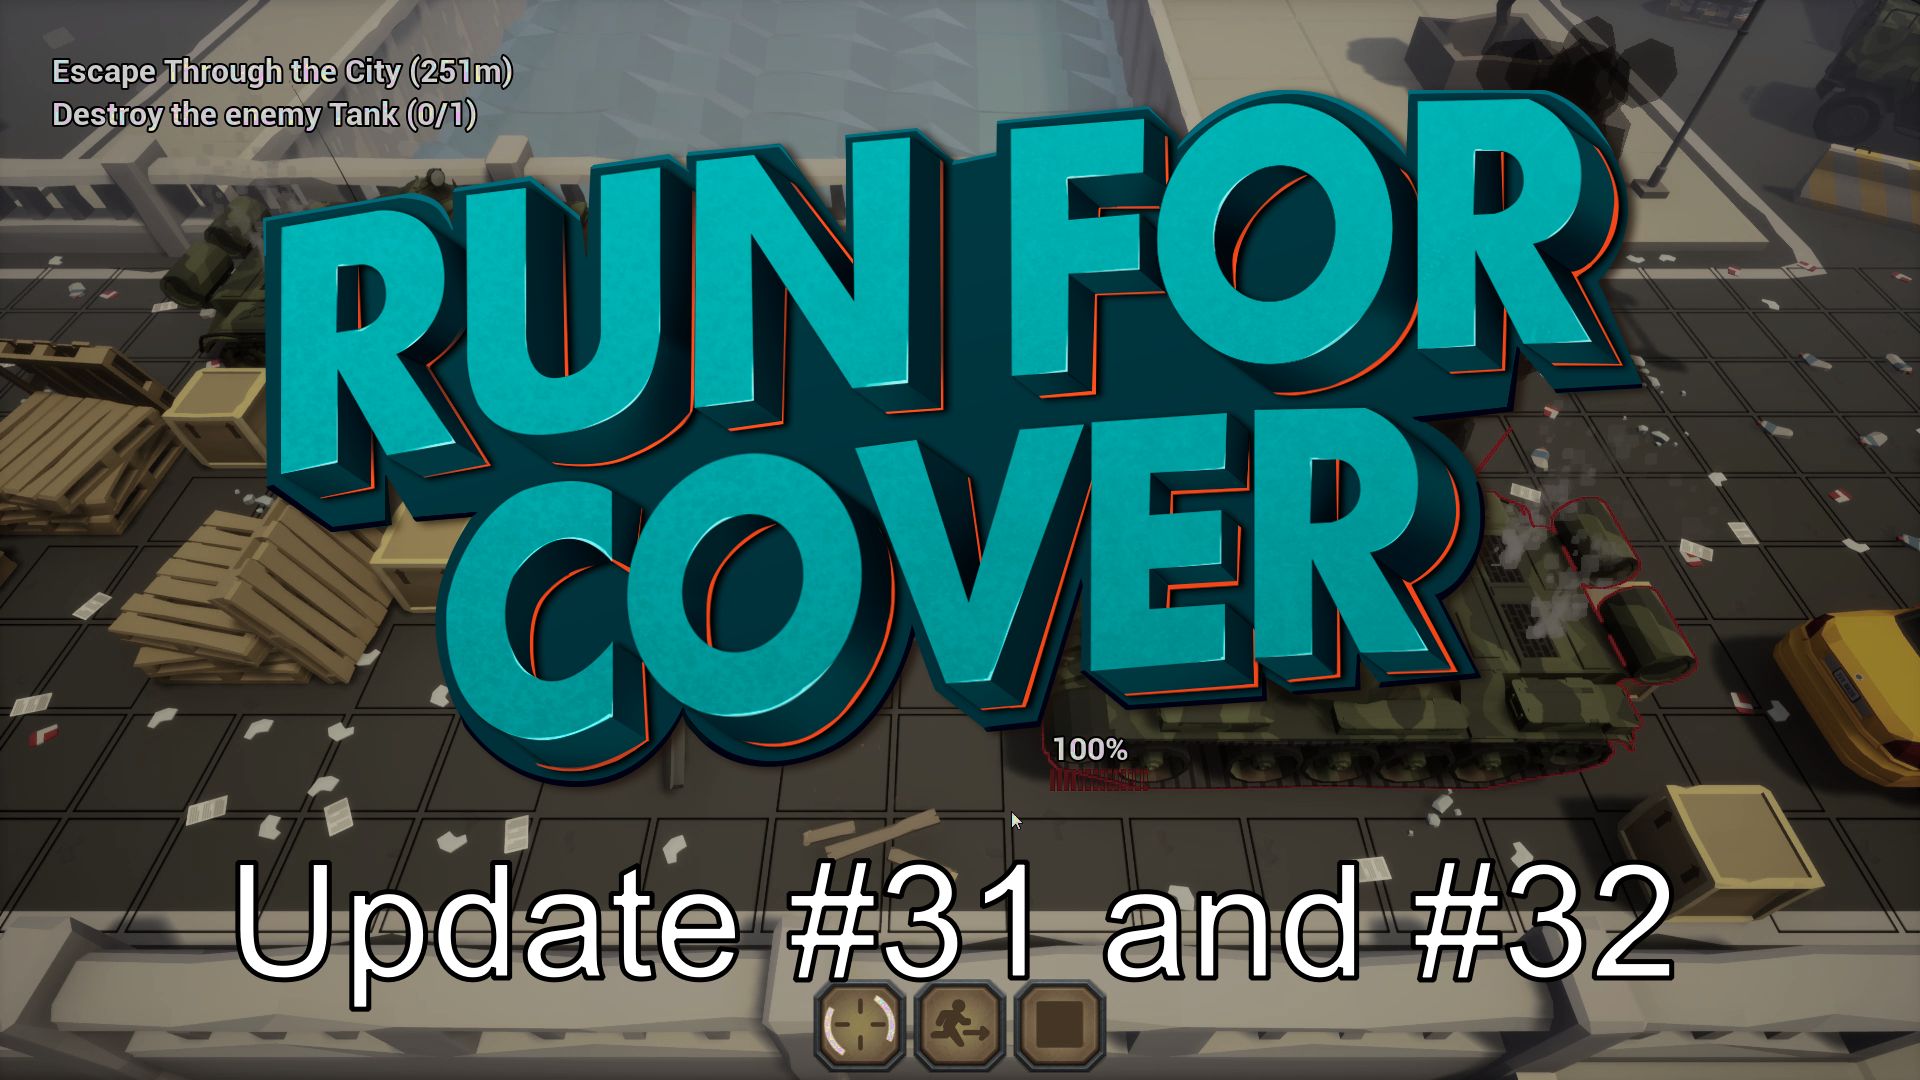 Running for cover. Run for Cover.